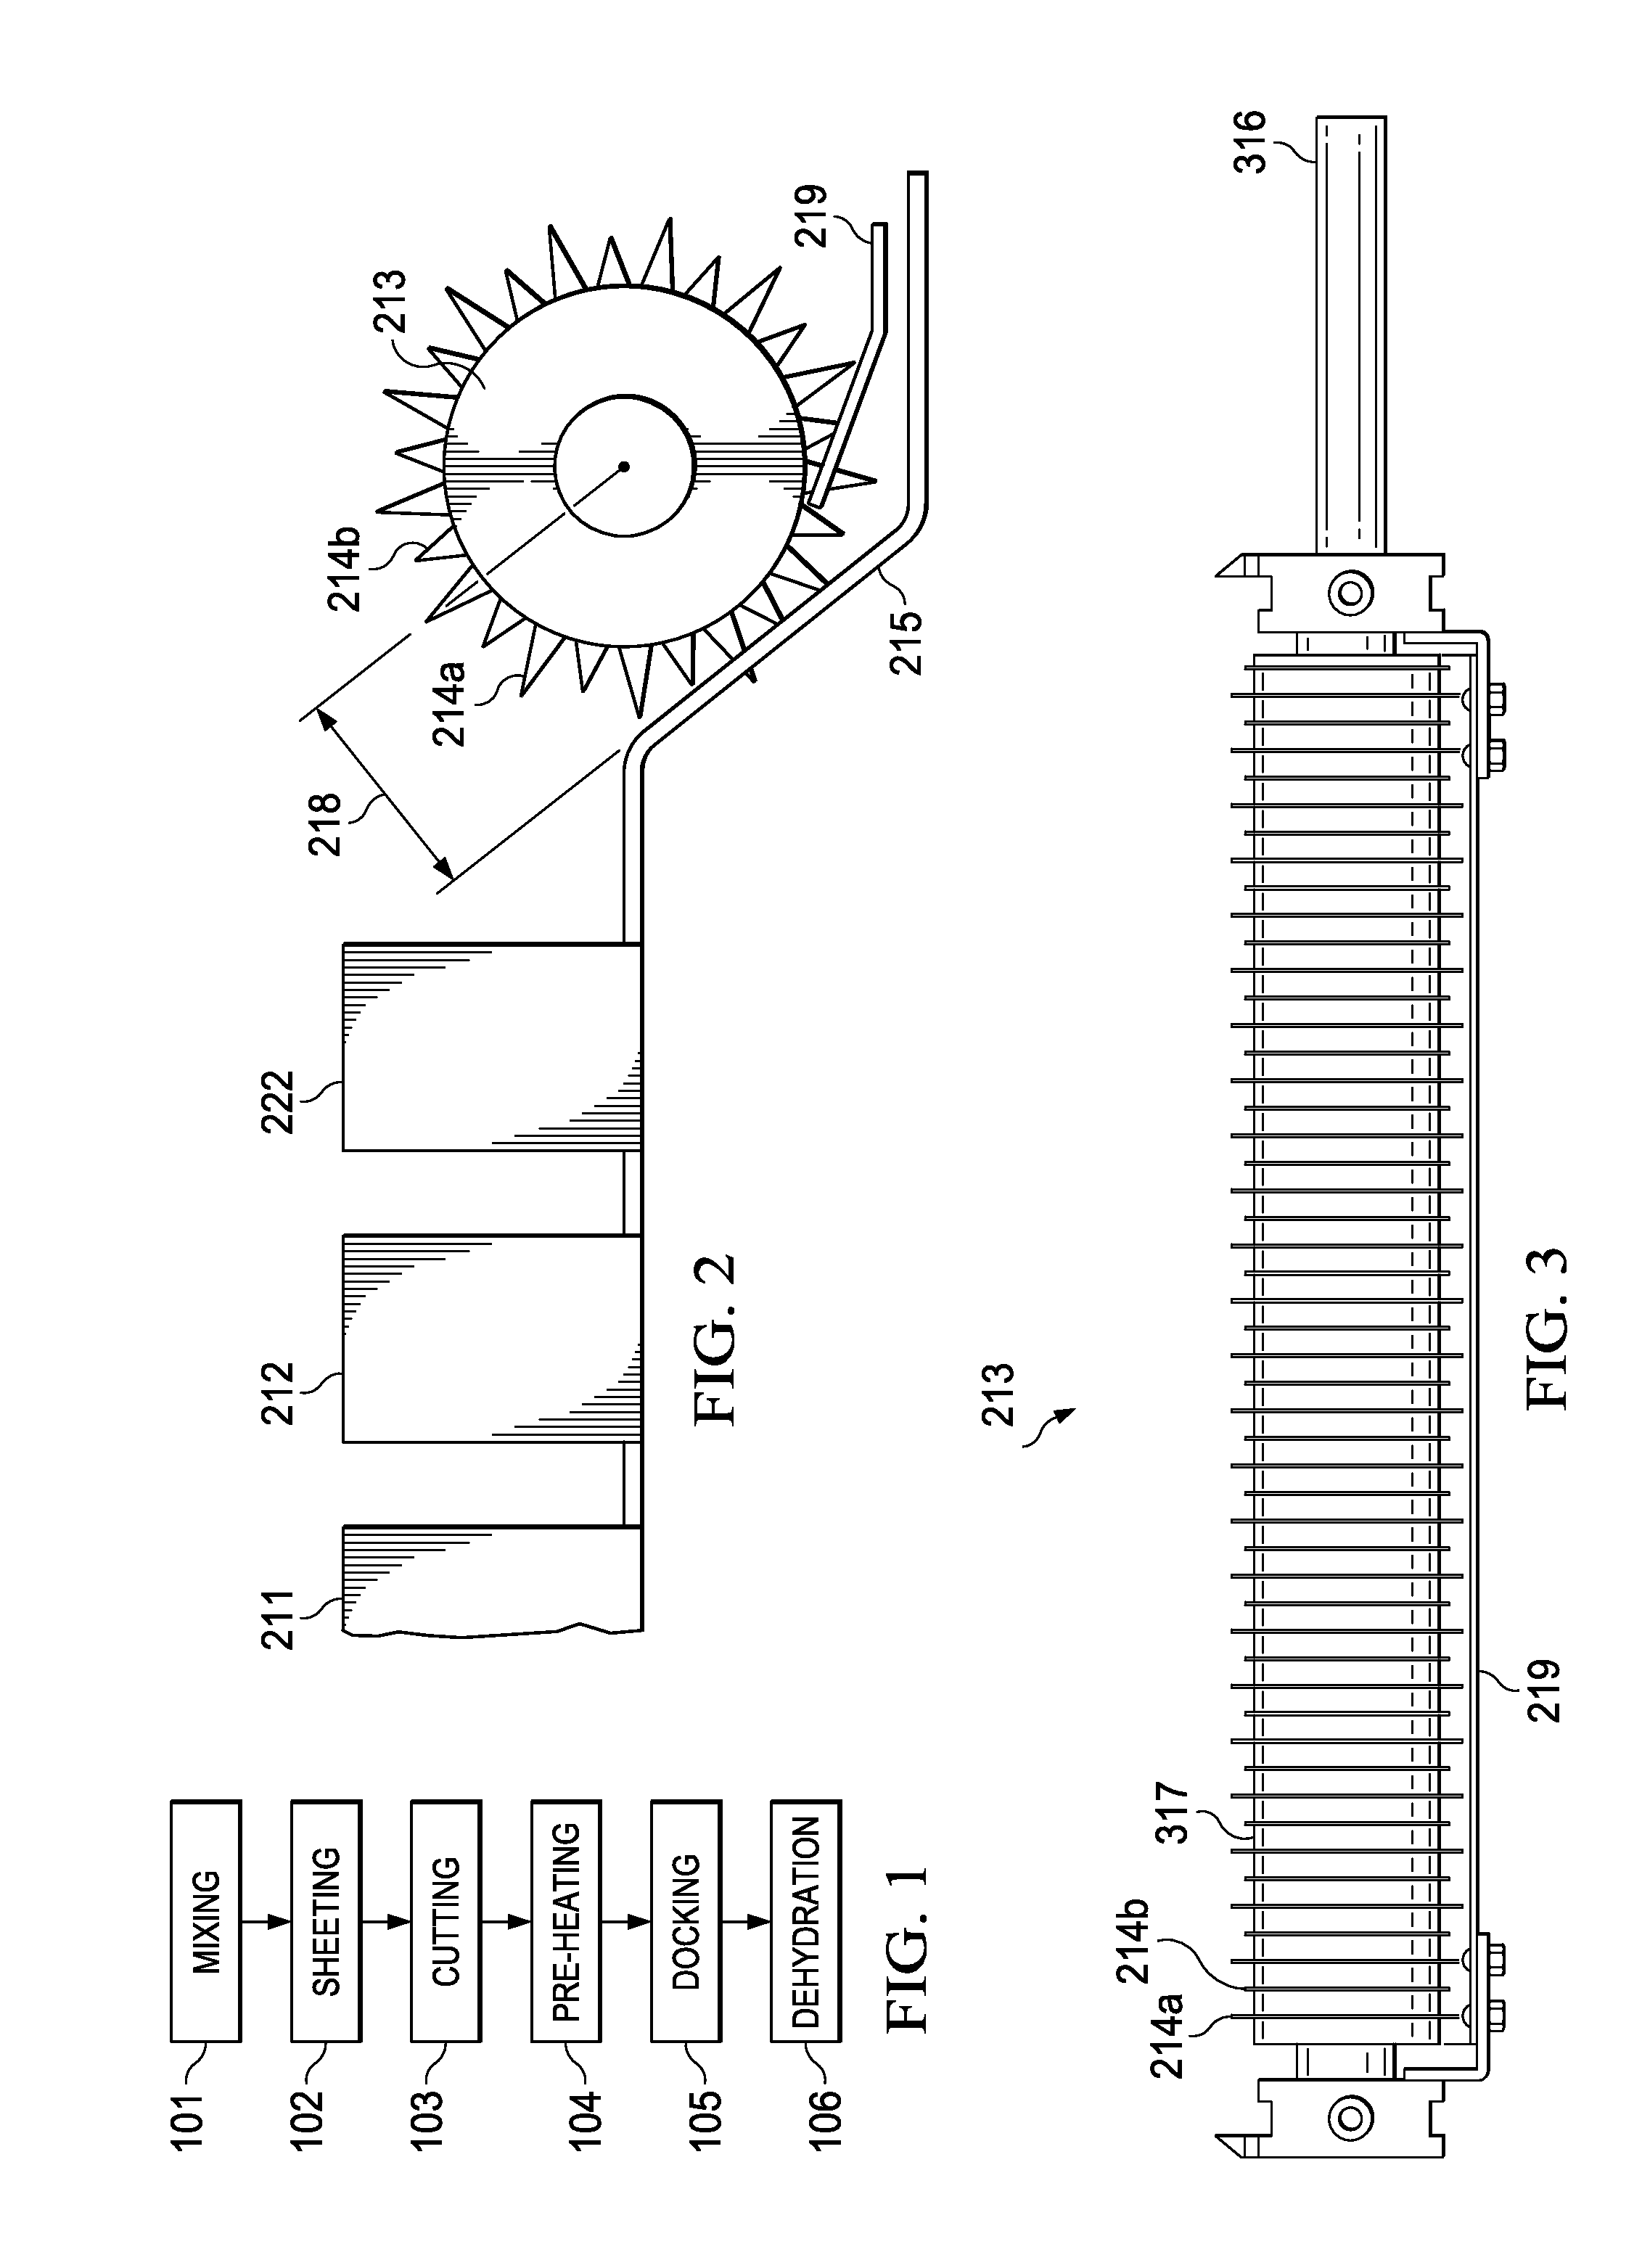 System and apparatus for controlling blistering